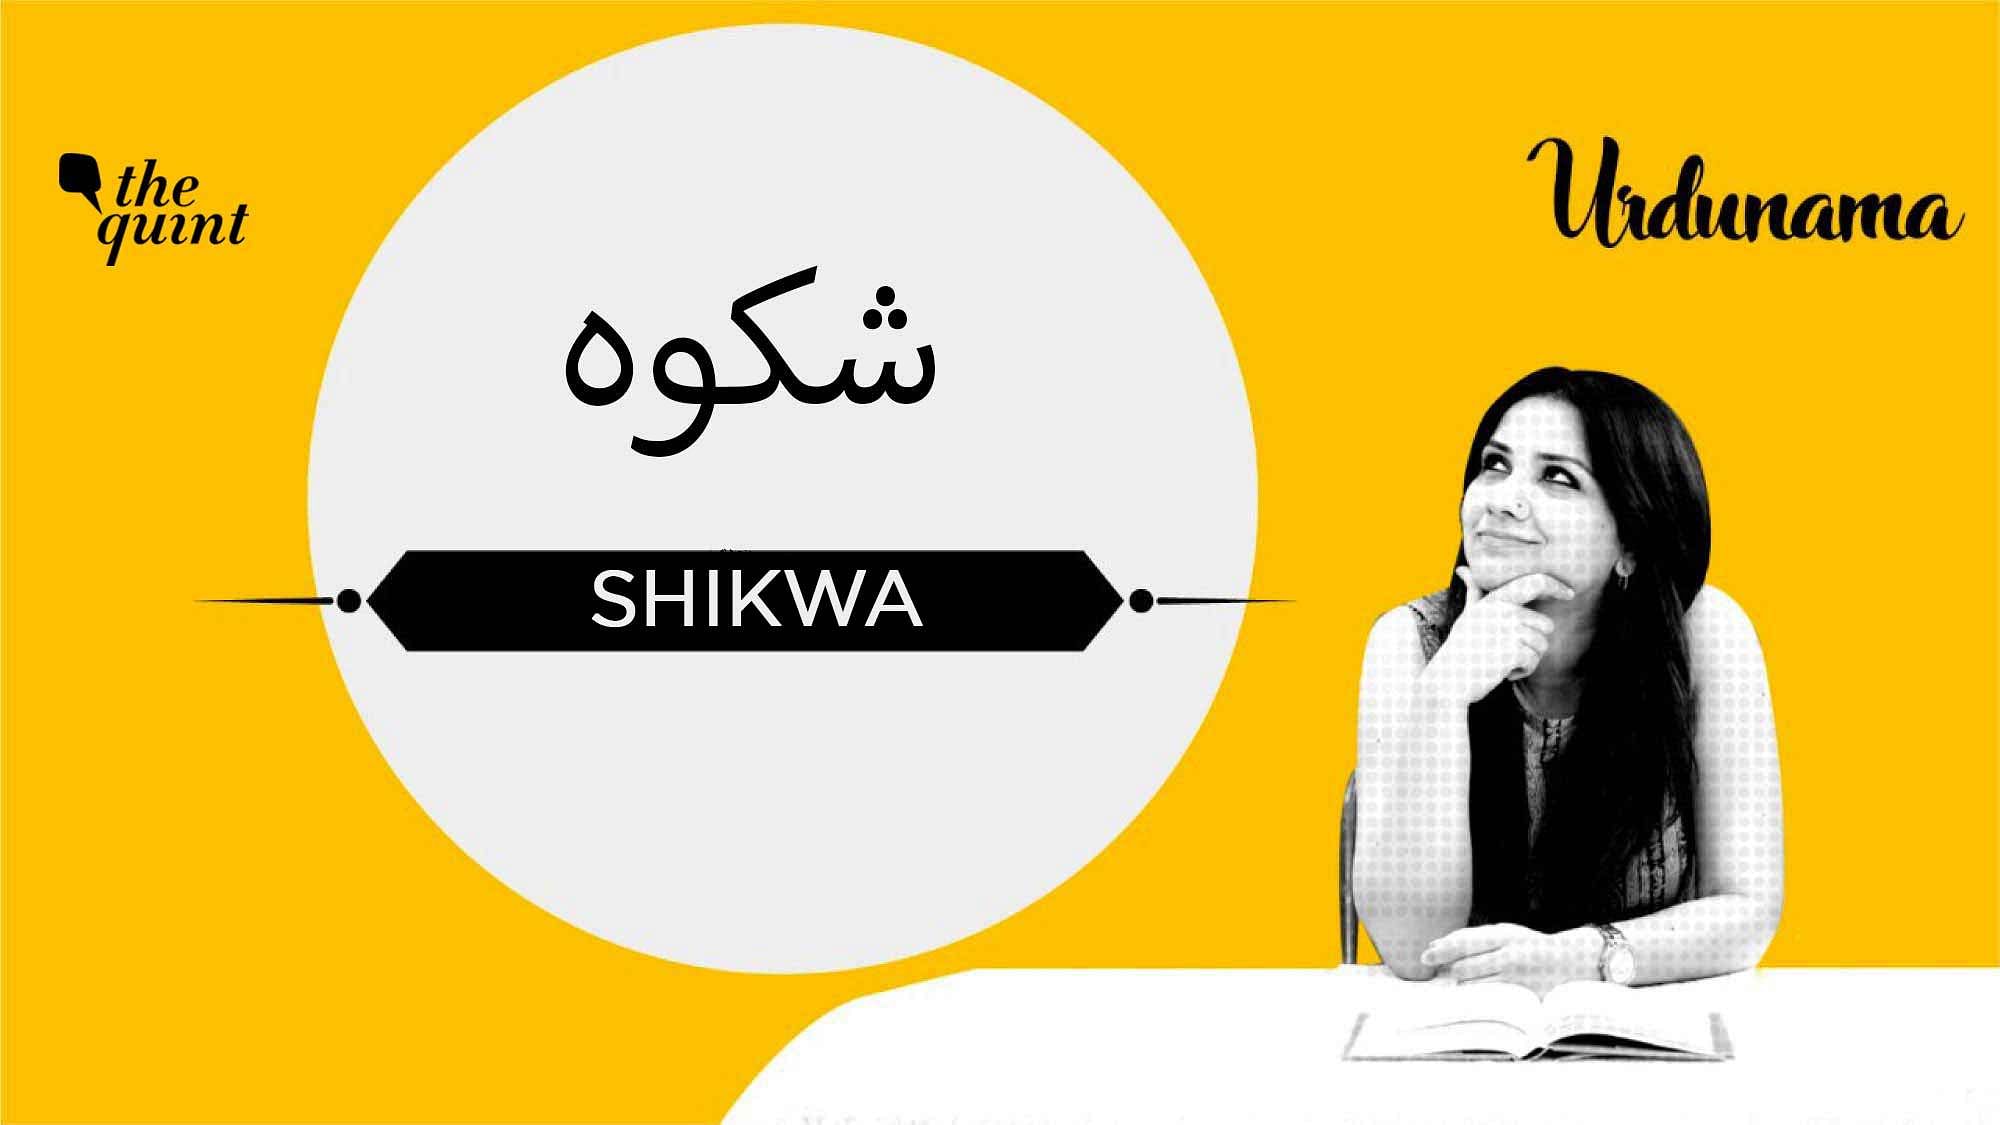 Learn the meaning of the word ‘shikwa’ in this episode of Urdunama, and take home the lessons poets like Jaun Eliya have for us.